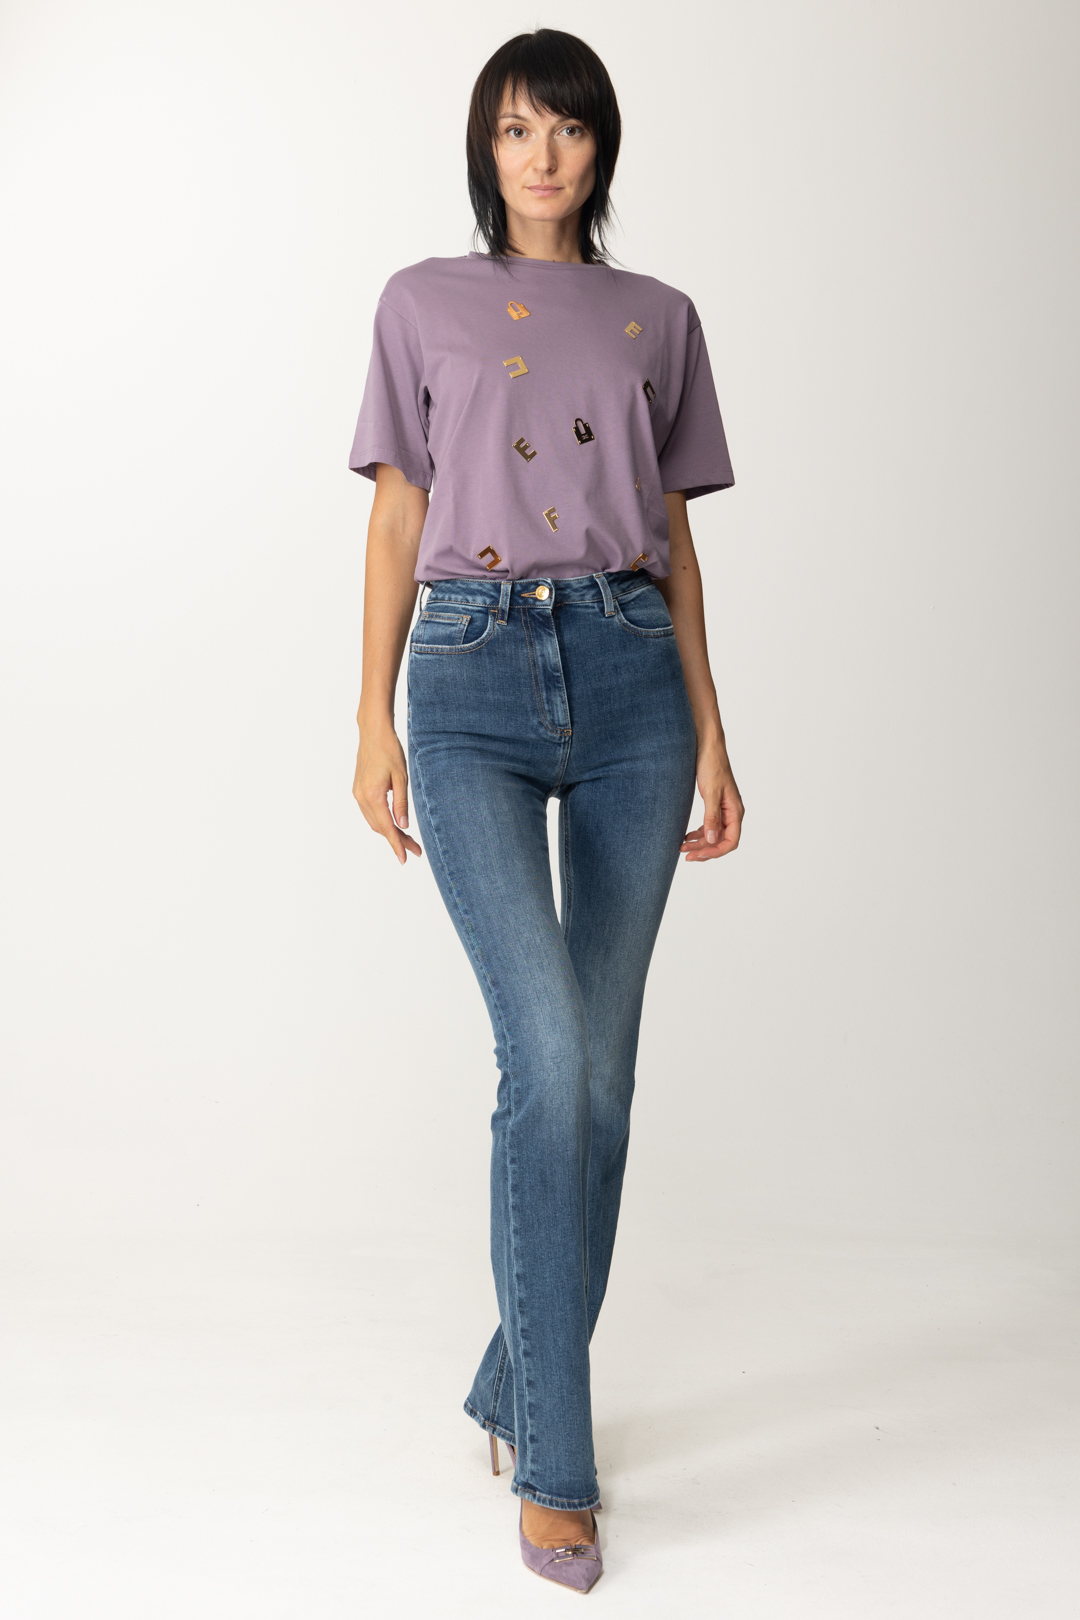 Preview: Elisabetta Franchi T-shirt with lettering plates CANDY VIOLET